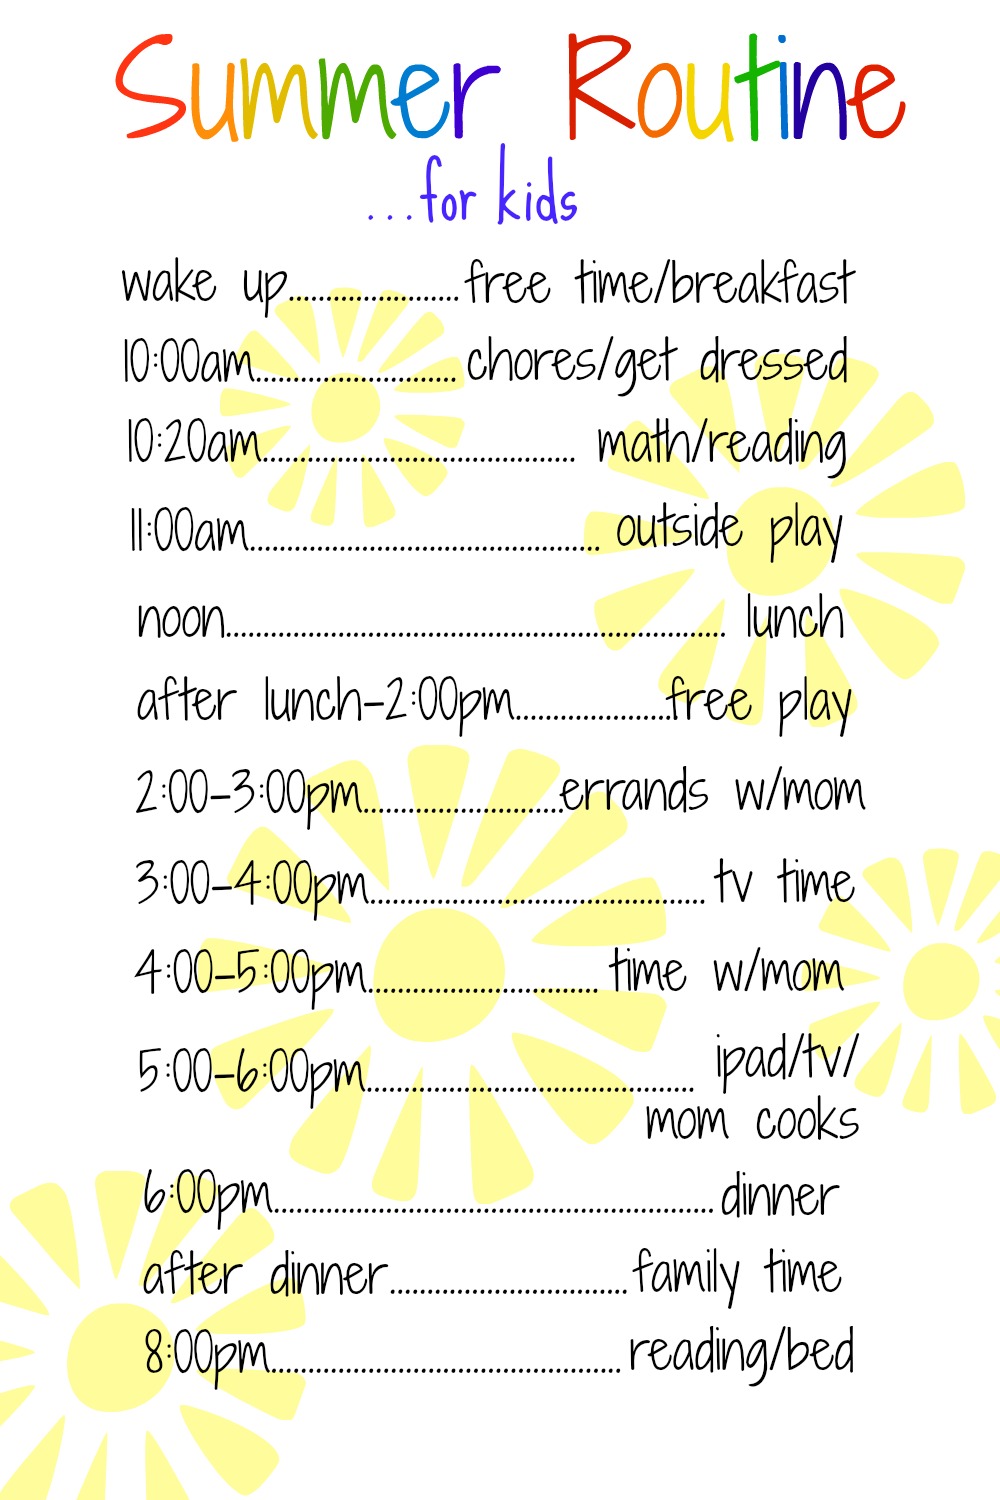 daily schedule at kid